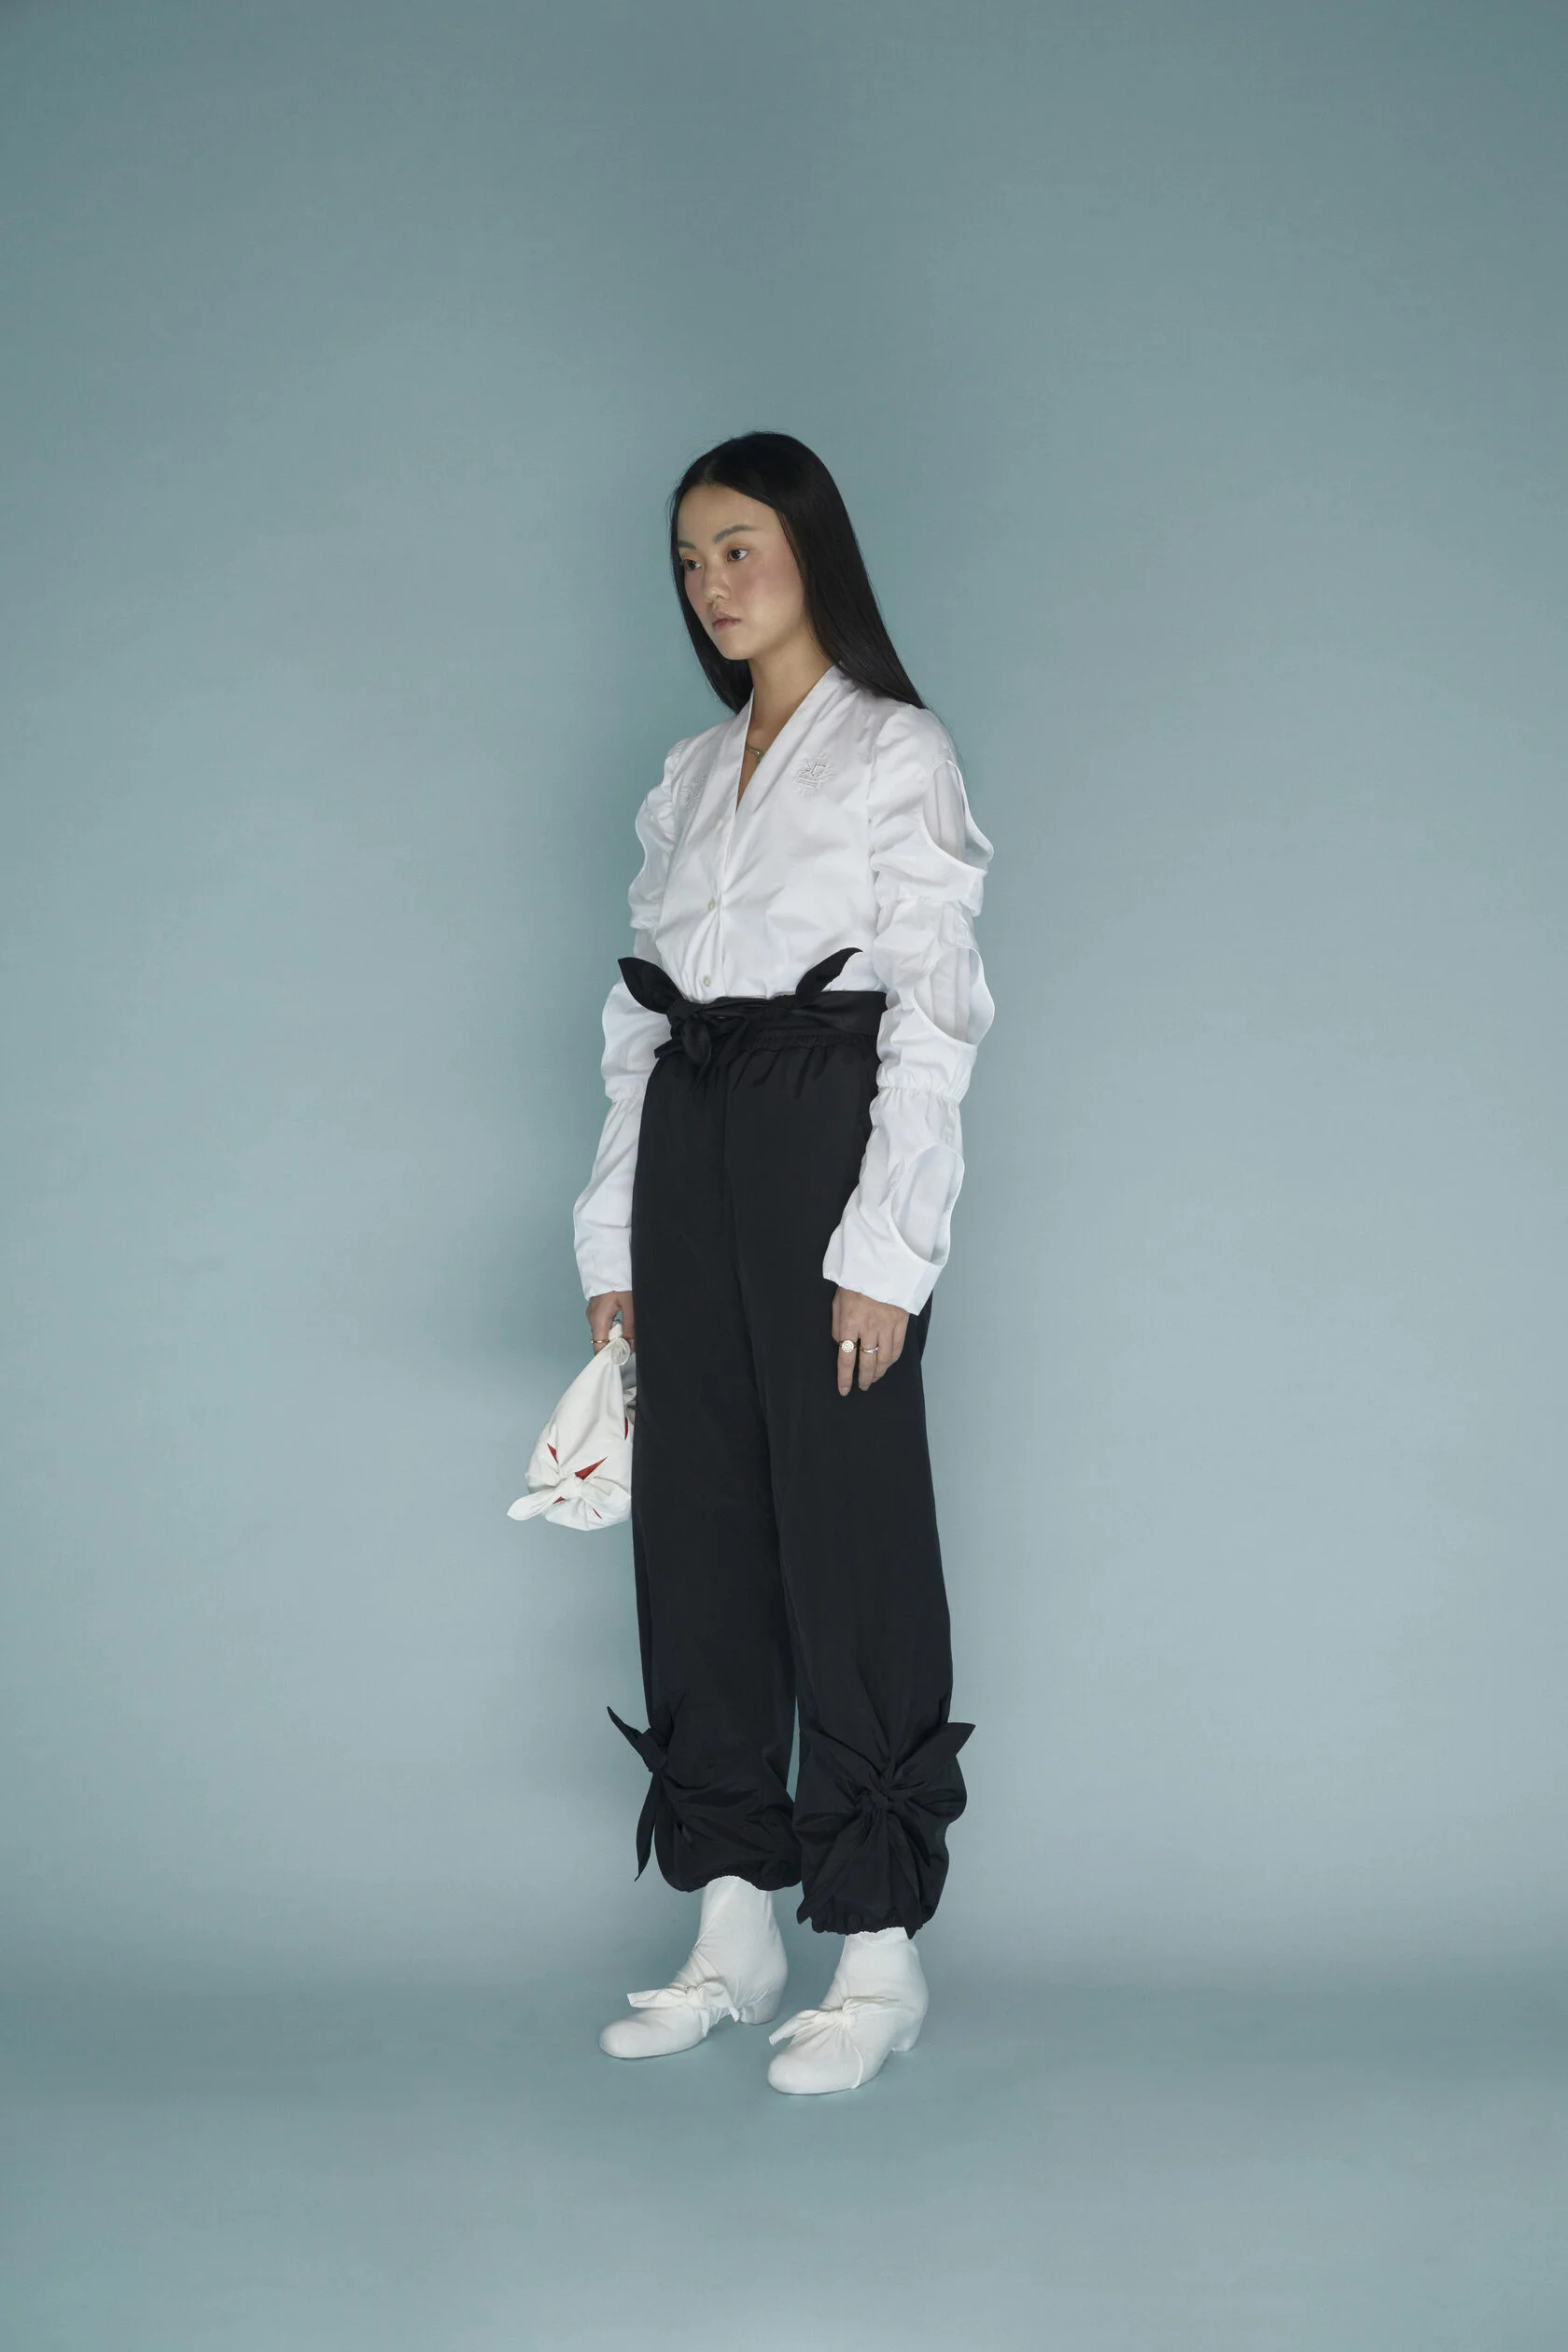 Invite An Entirely New Aesthetic Into Your Wardrobe With These Looks From J.Kim